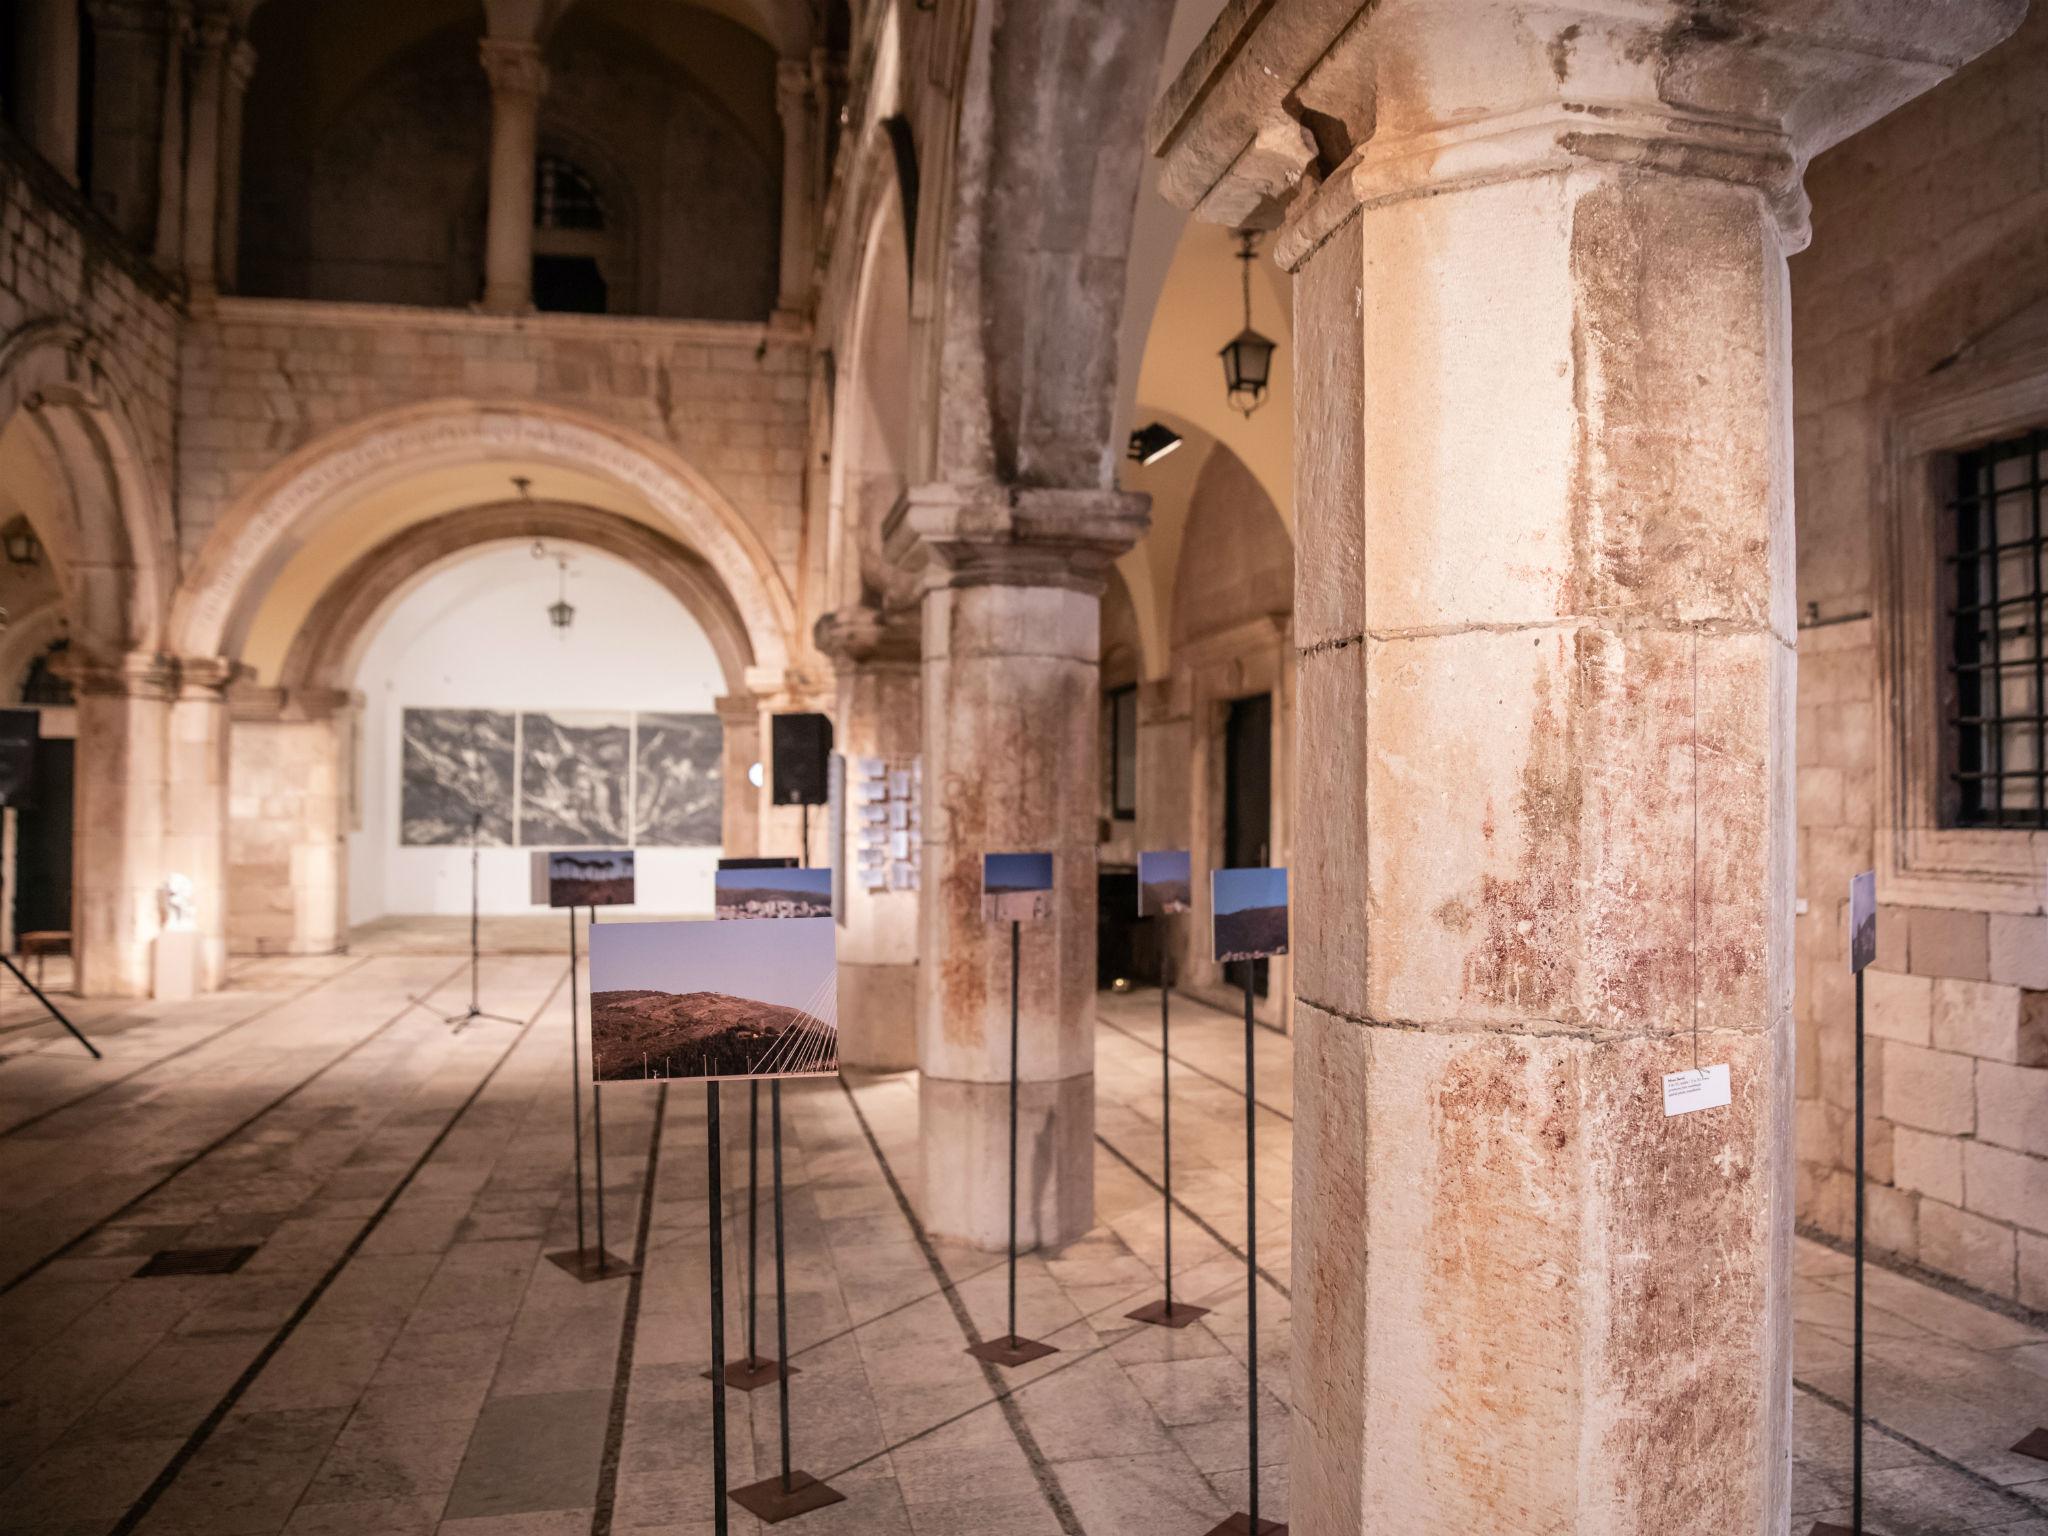 Horrors of Native Soil, an exhibition of contemporary art at the Sponza Palace